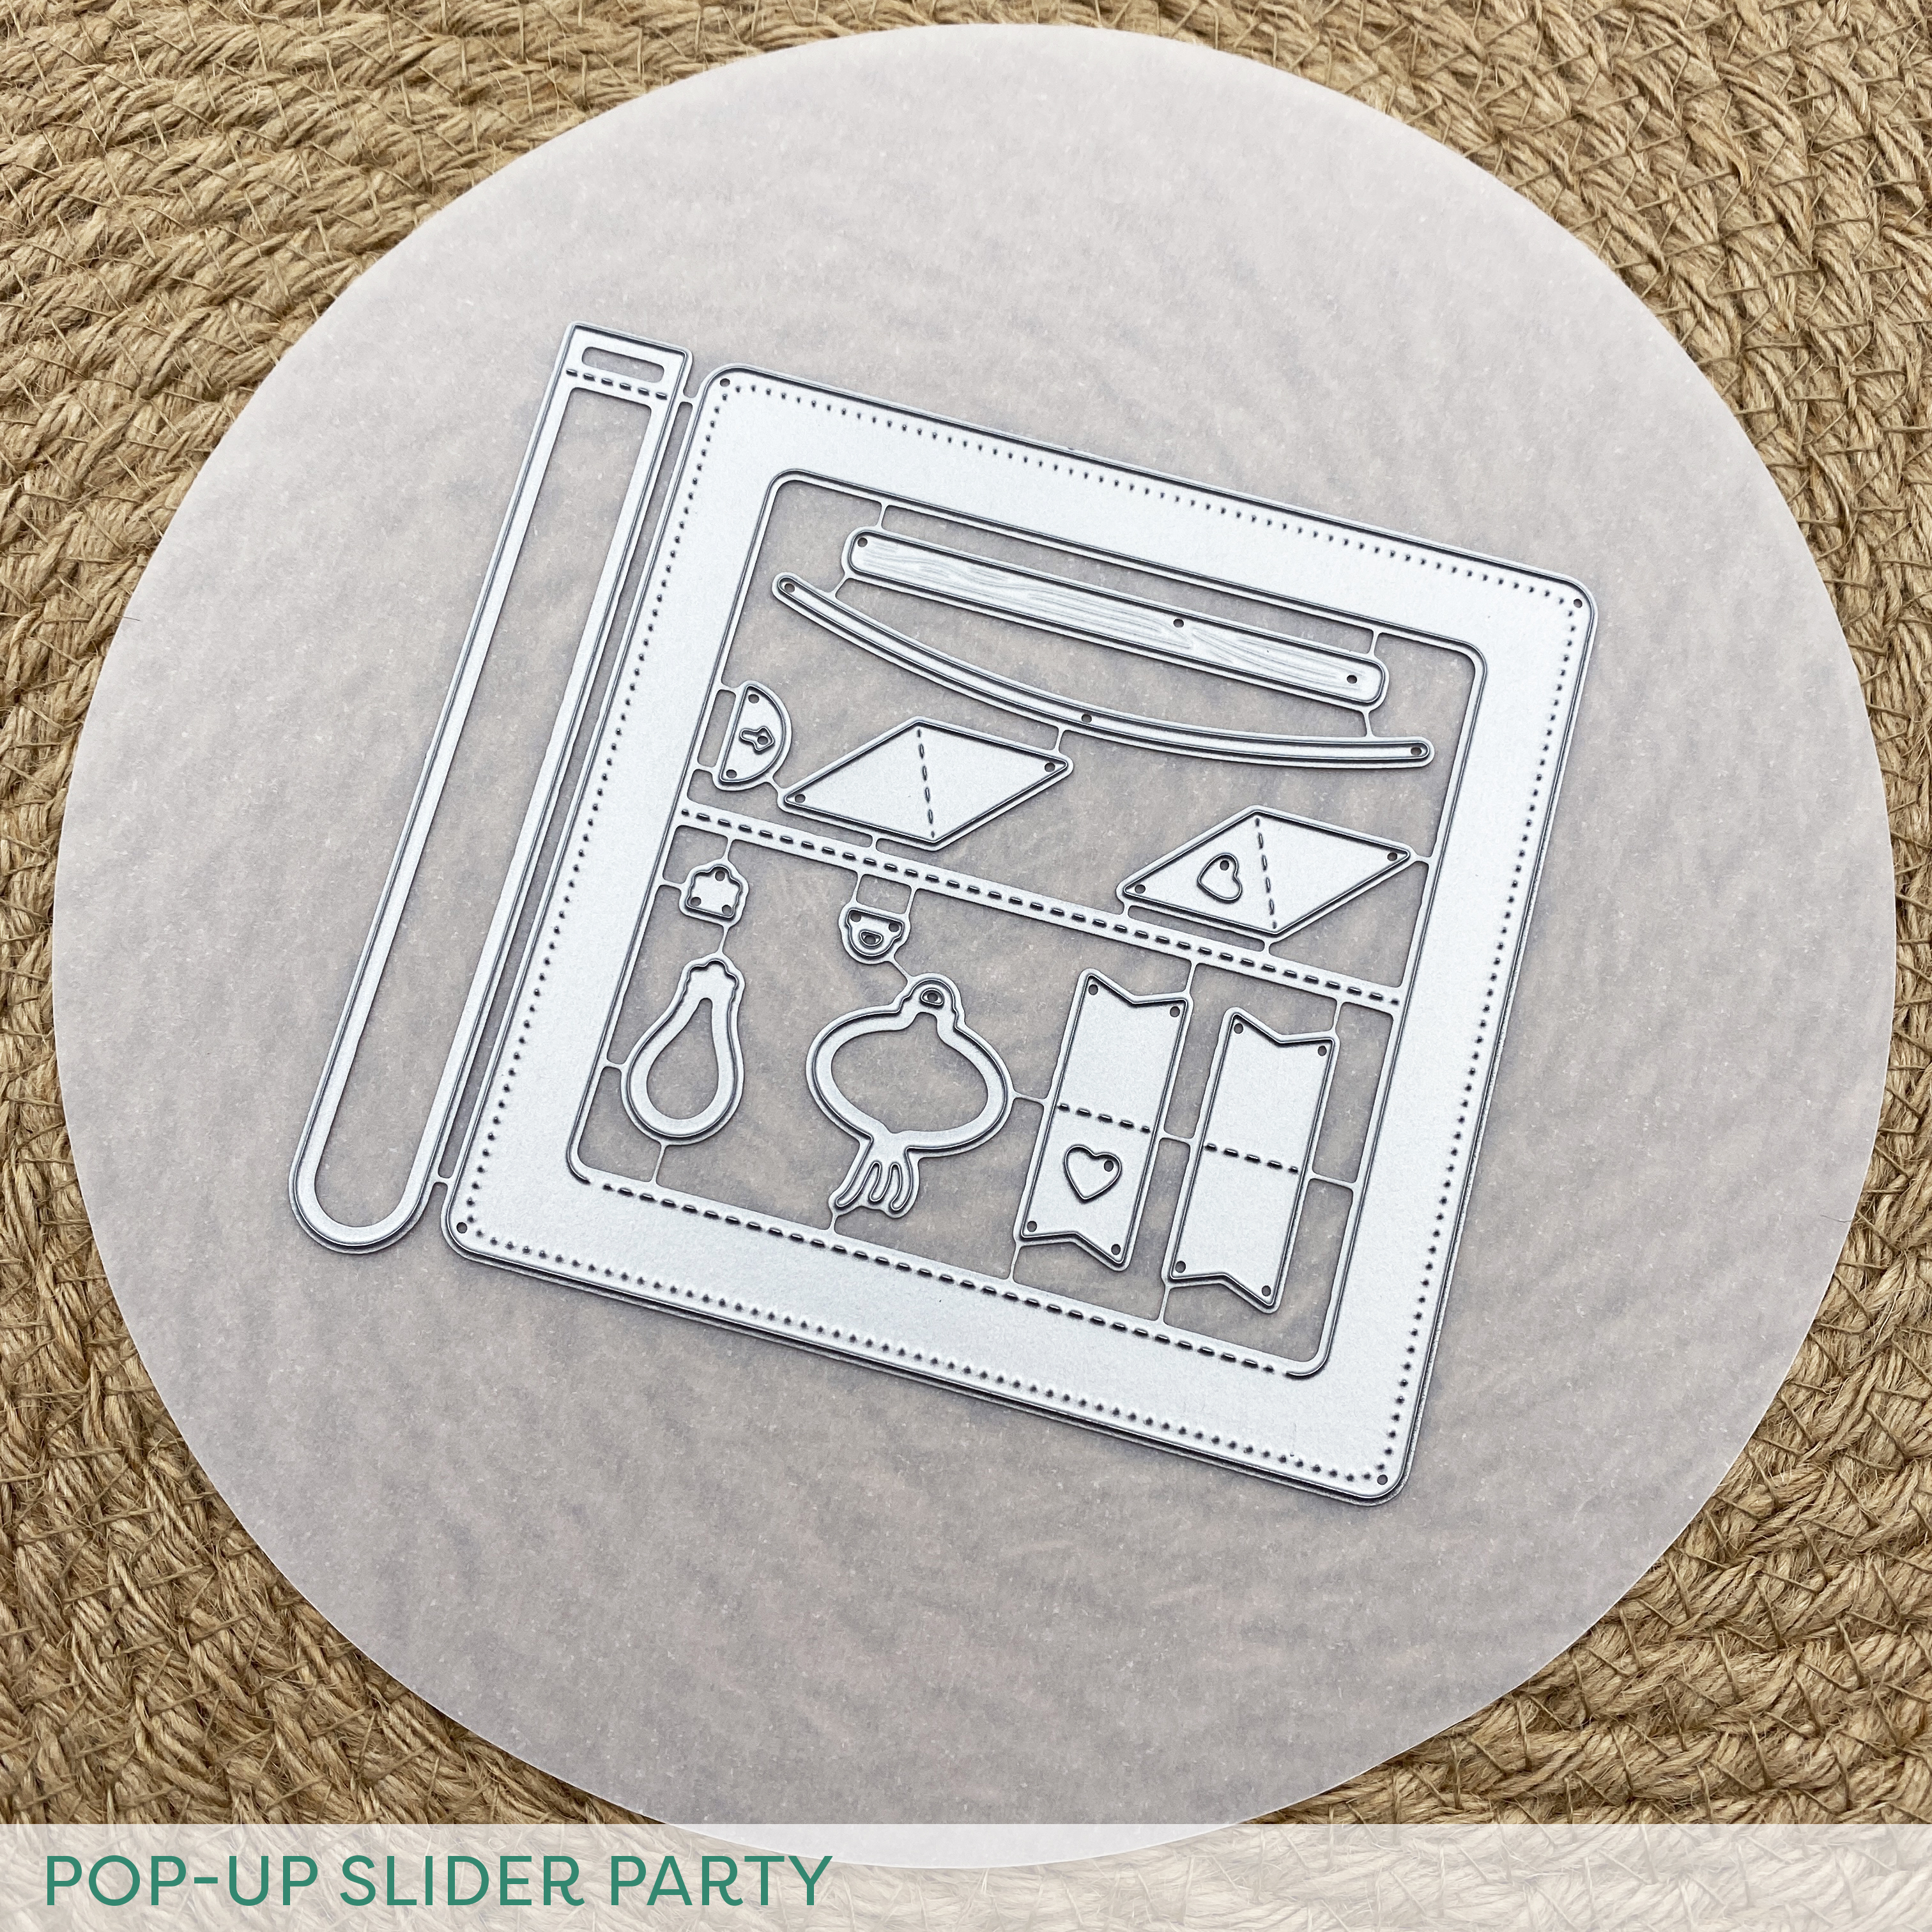 Cool Cuts Pop-up slider "Party"